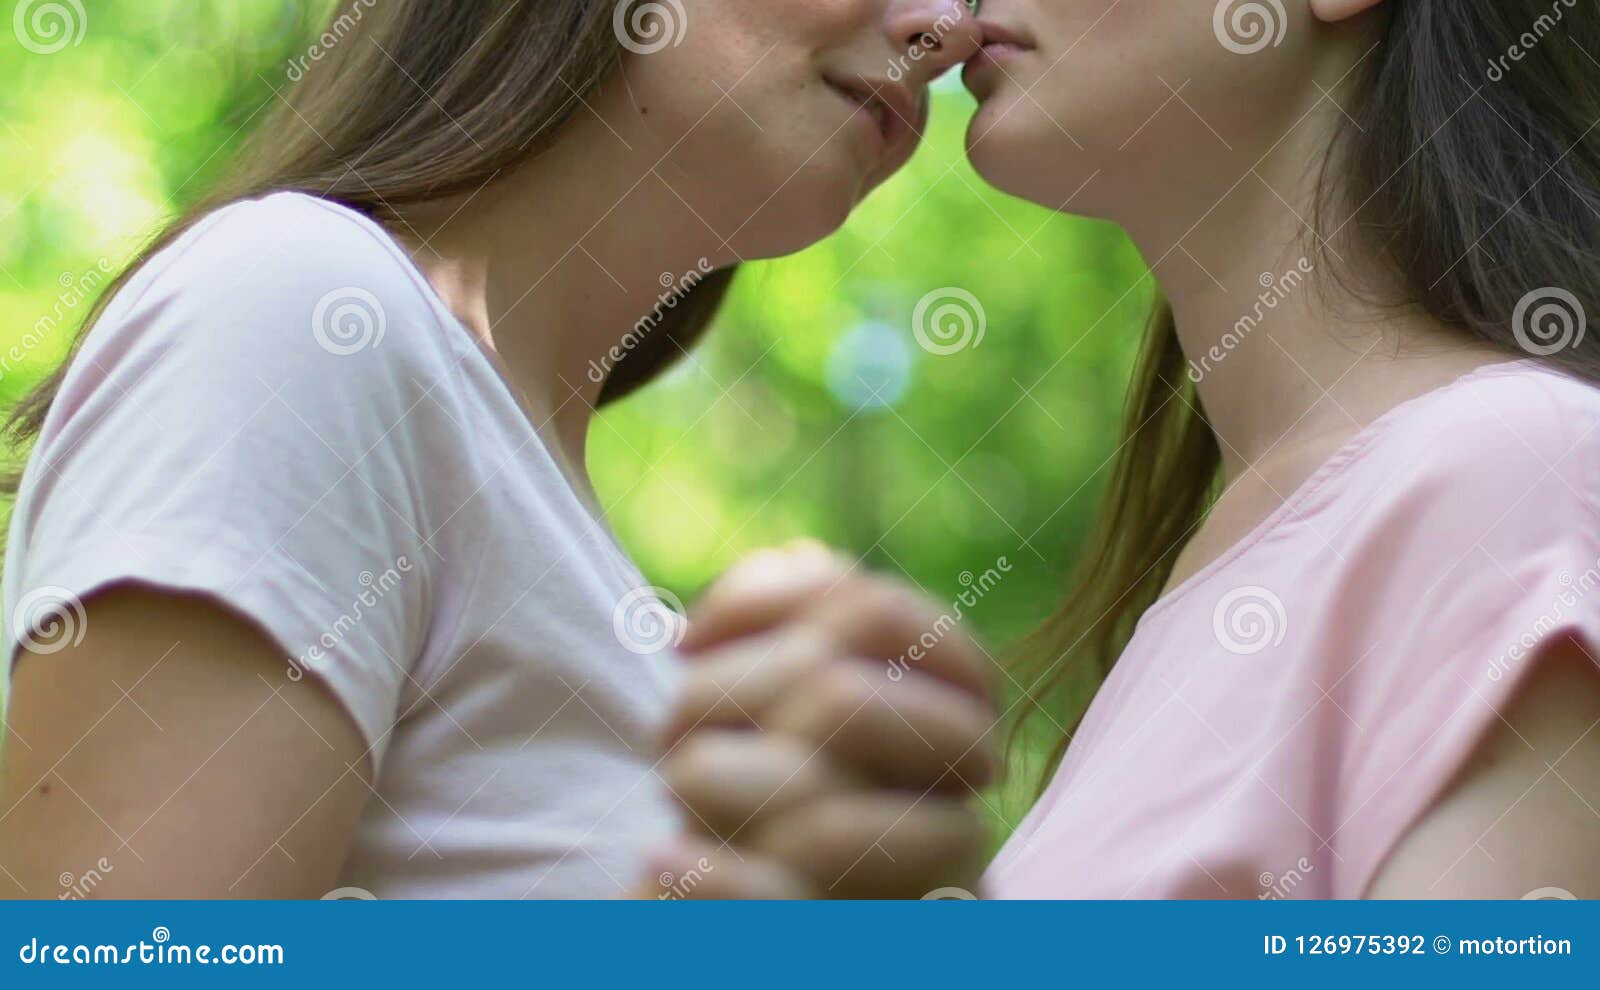 Pretty Lesbians Holding Hands And Kissing Each Other With Love Outdoors Closeup Stock Footage